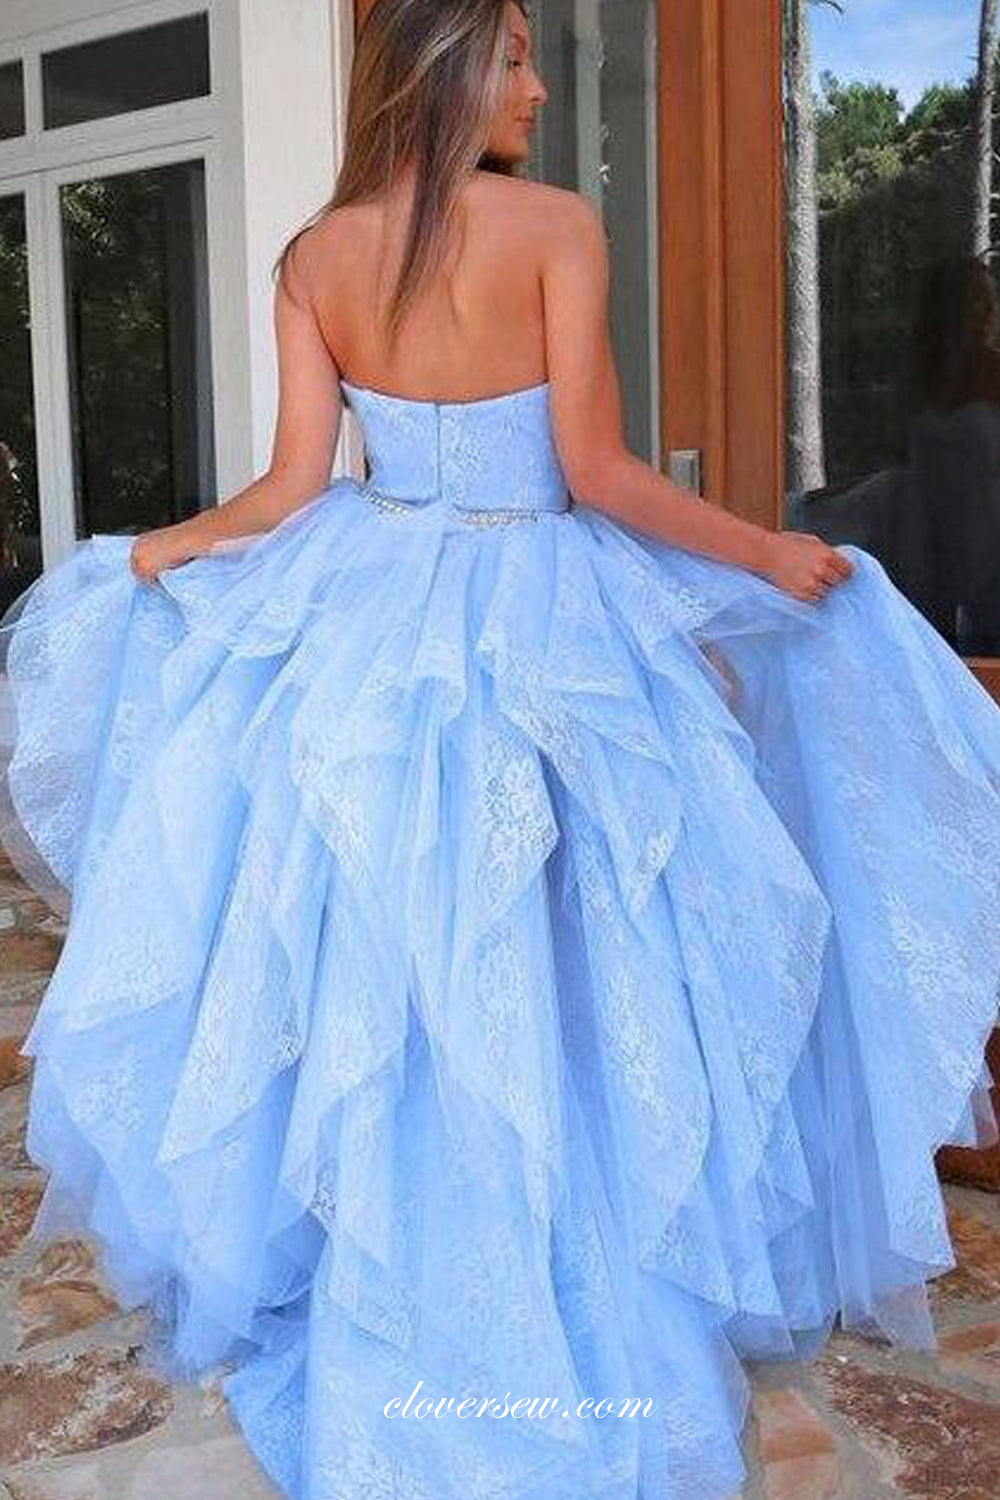 Two Piece Detachable Ruffles Skirt High Low Strapless Prom Dresses, CP0865